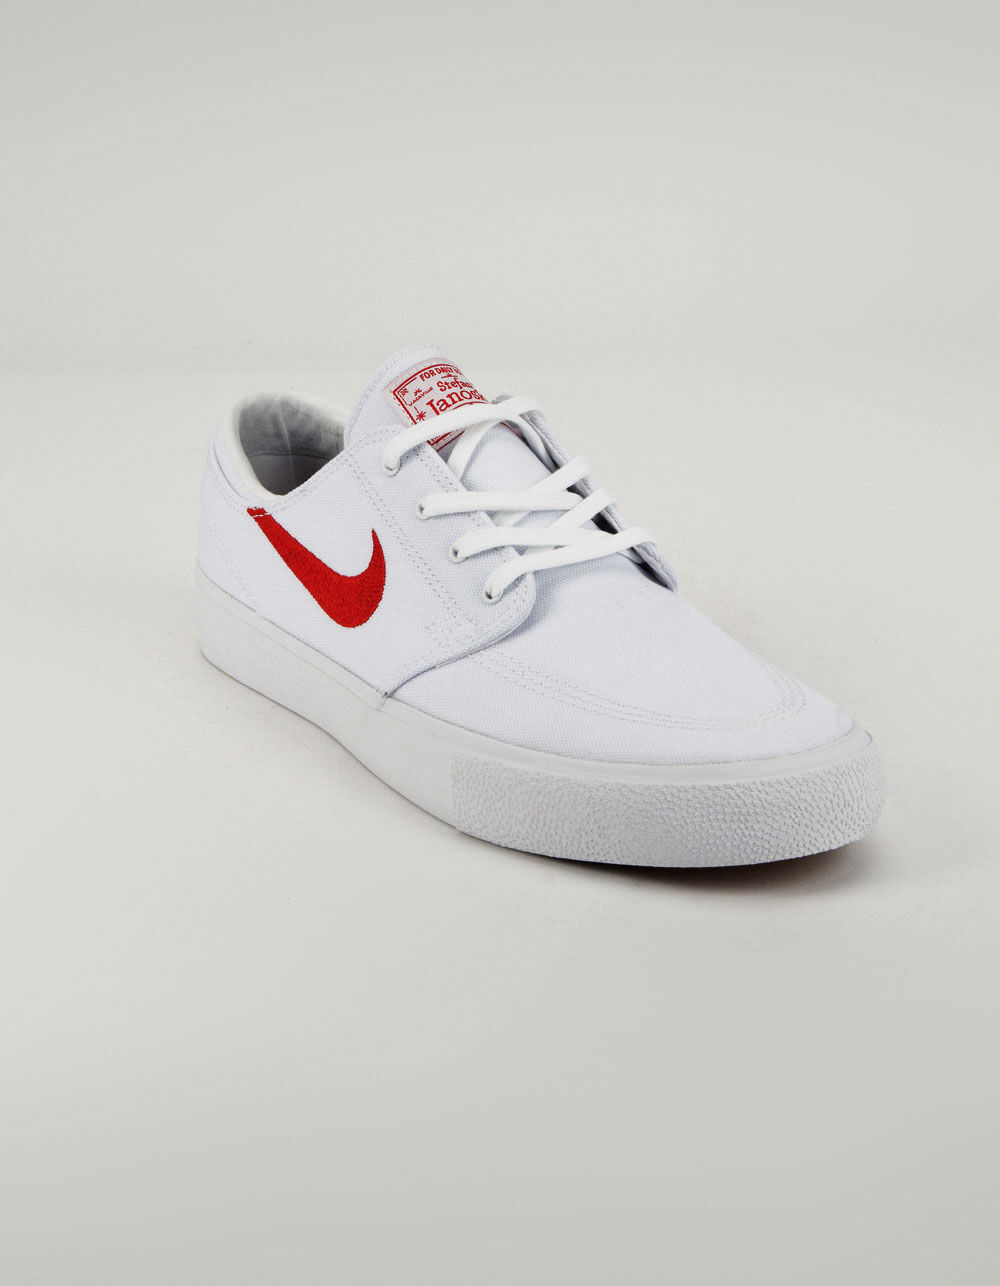 SB Zoom Stefan Janoski Canvas RM Mens White Red Shoes - WHITE COMBO | Tillys